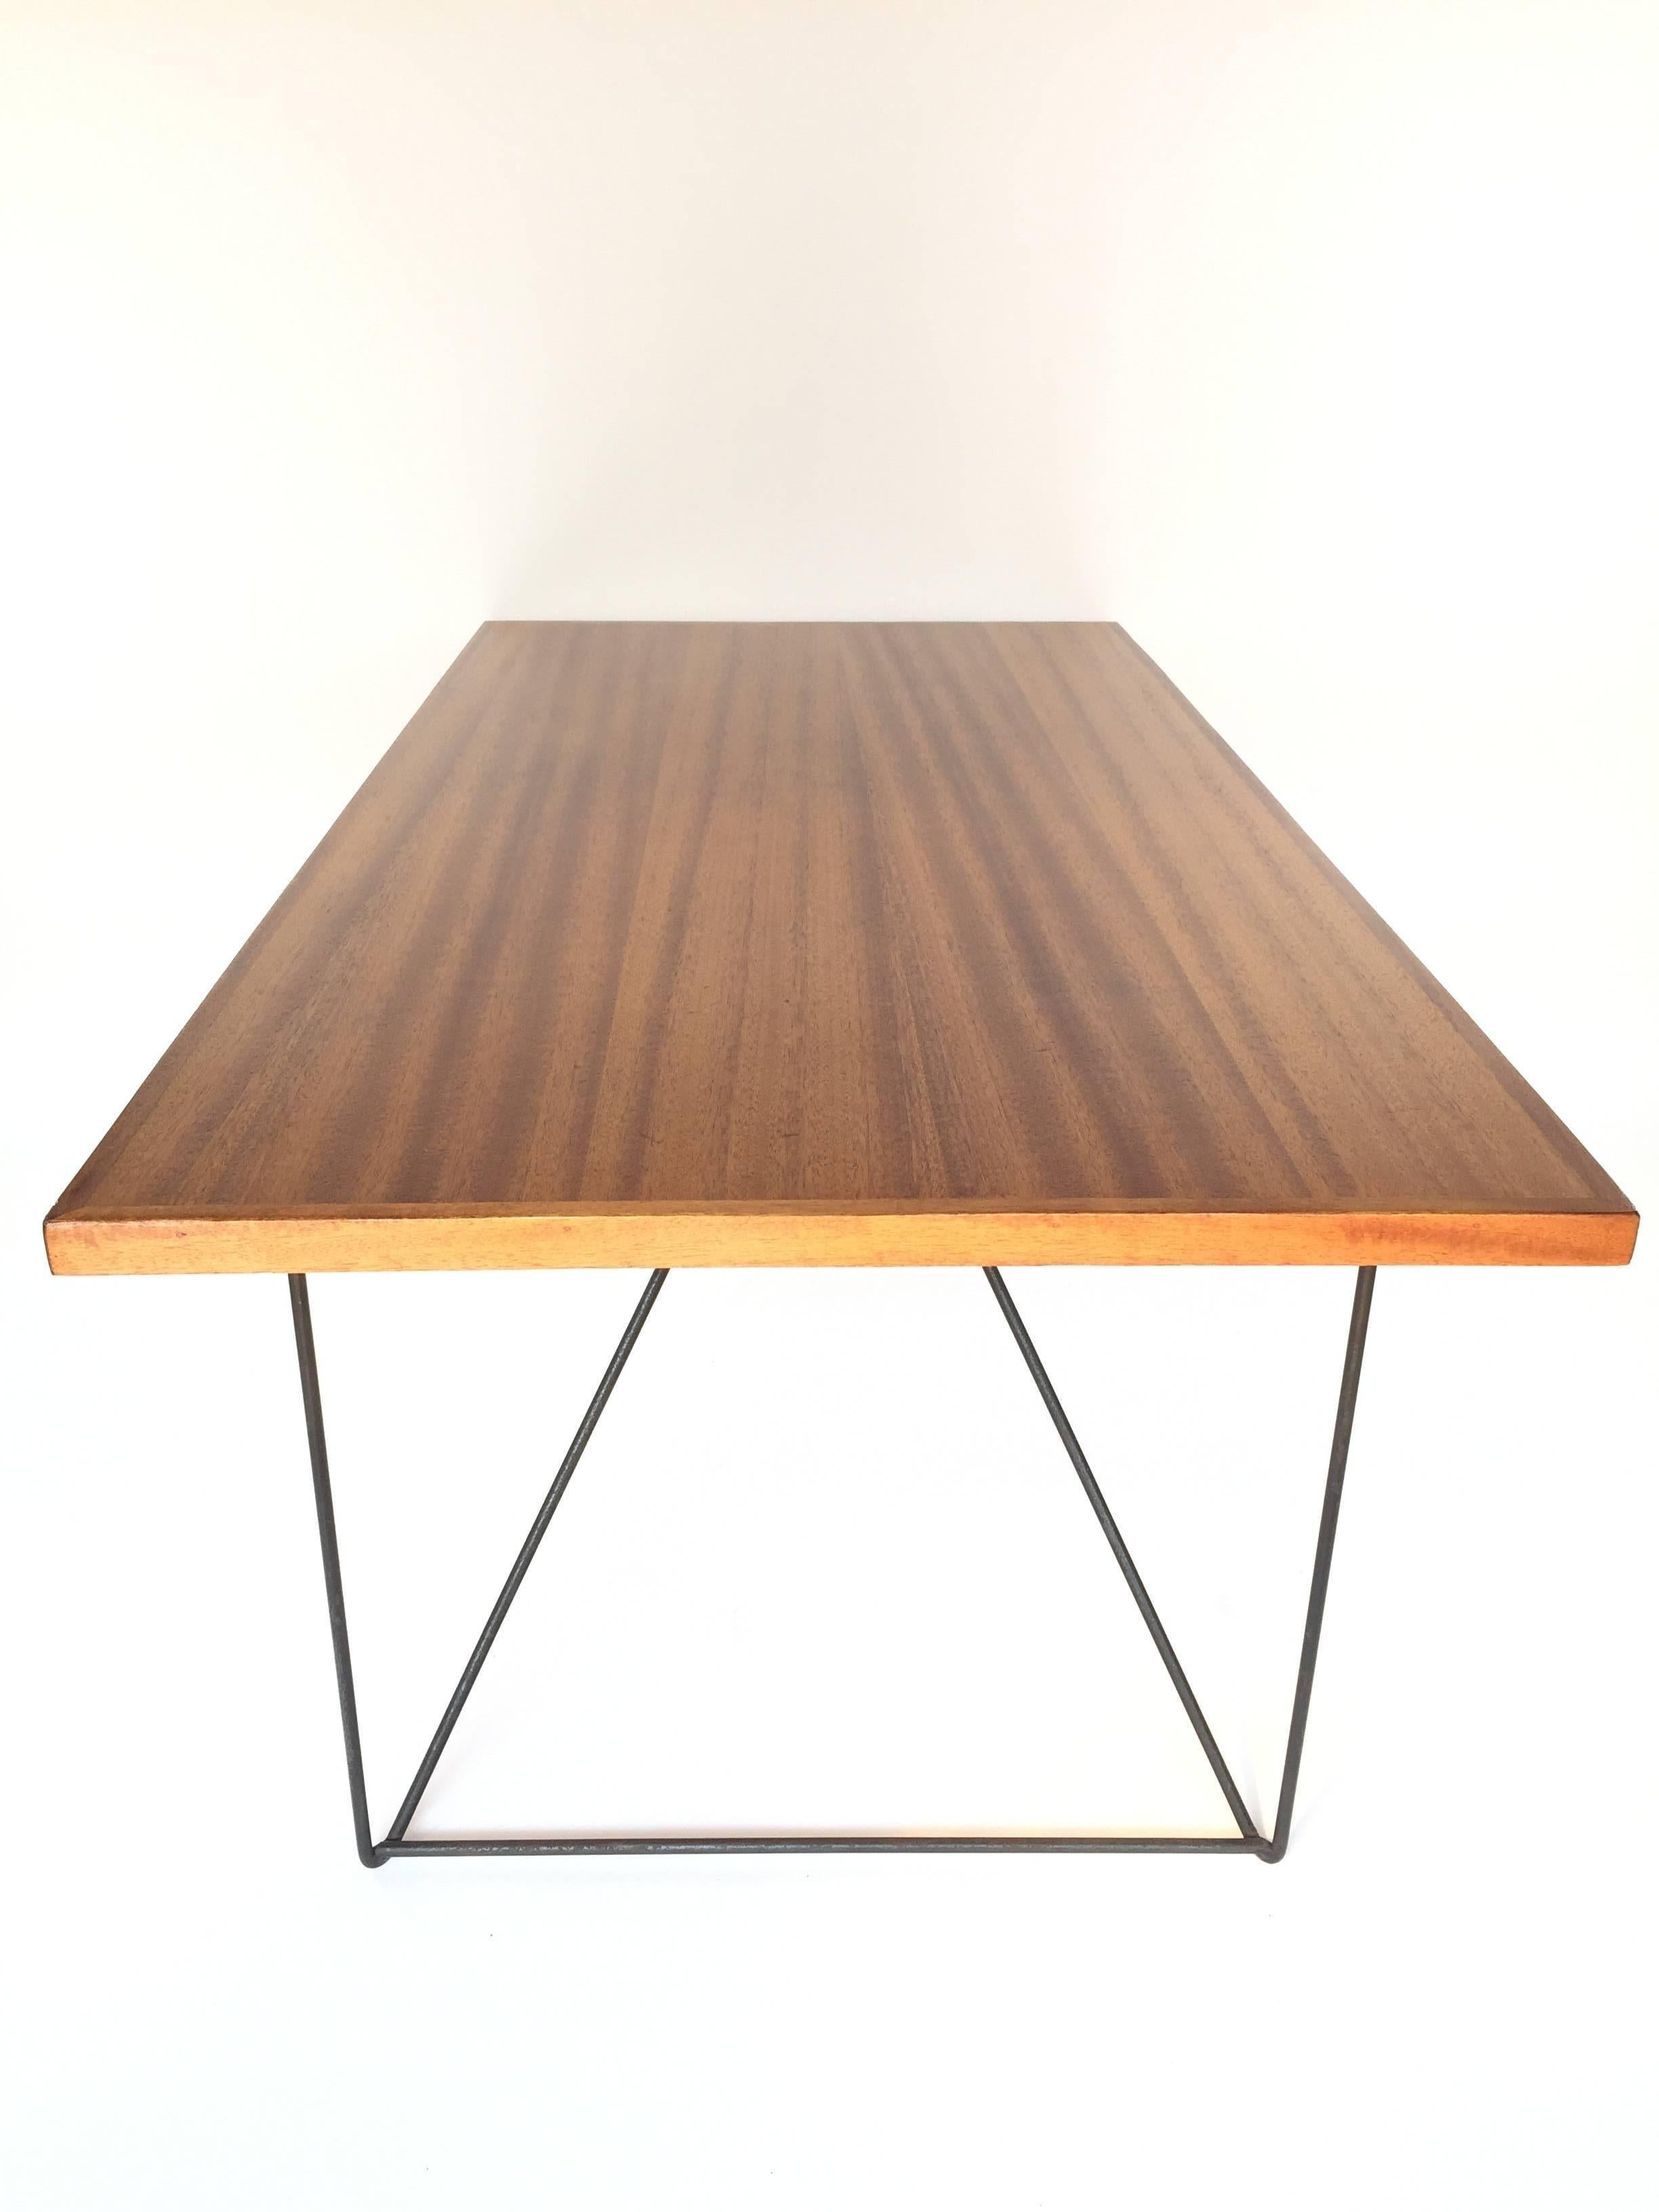 Dining table made by Luther Conover circa 1950 in Sausalito, California. All original elements. A beautiful example of California midcentury design.